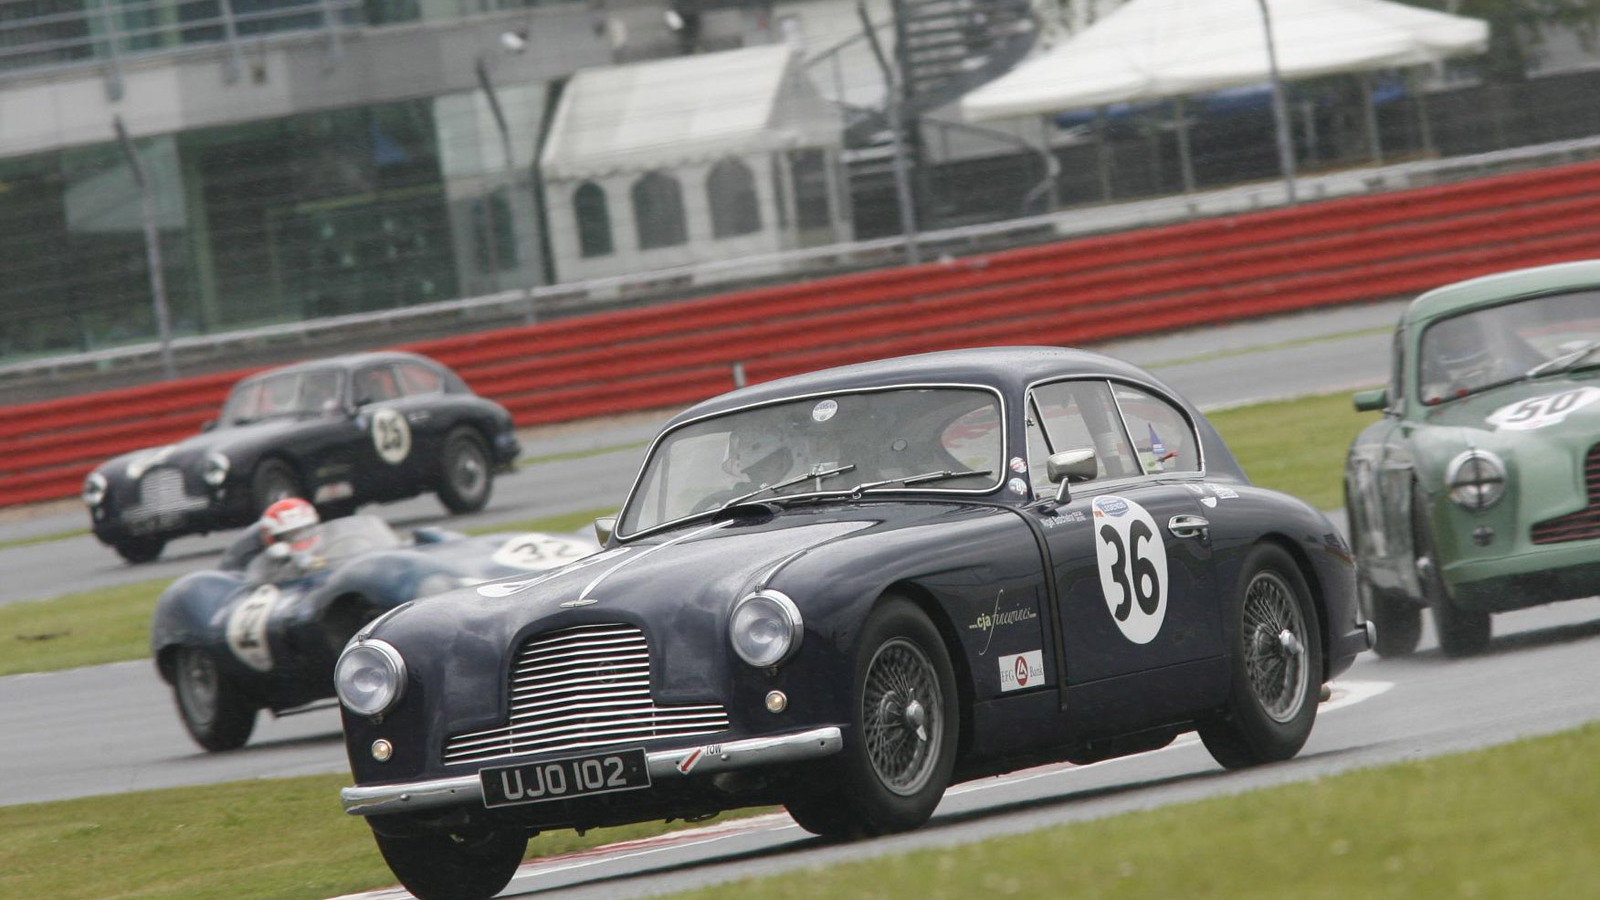 Classic Aston Martins at the Silverstone circuit